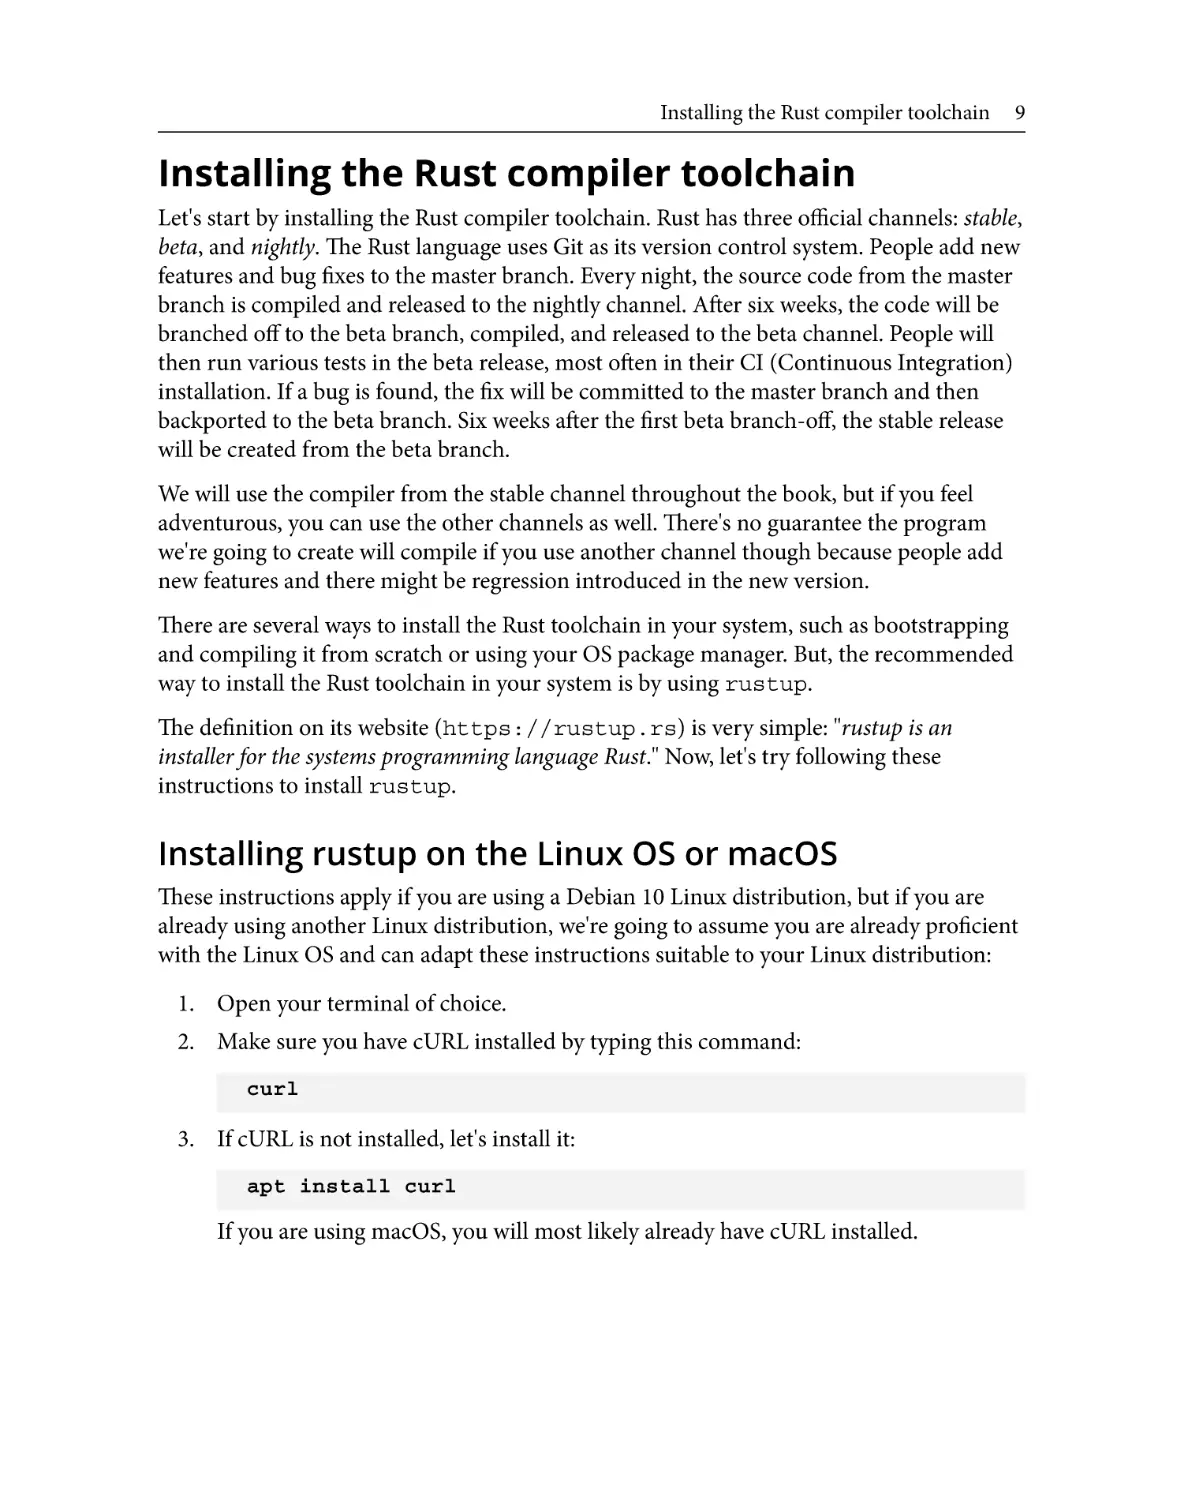 Installing the Rust compiler toolchain
Installing rustup on the Linux OS or macOS